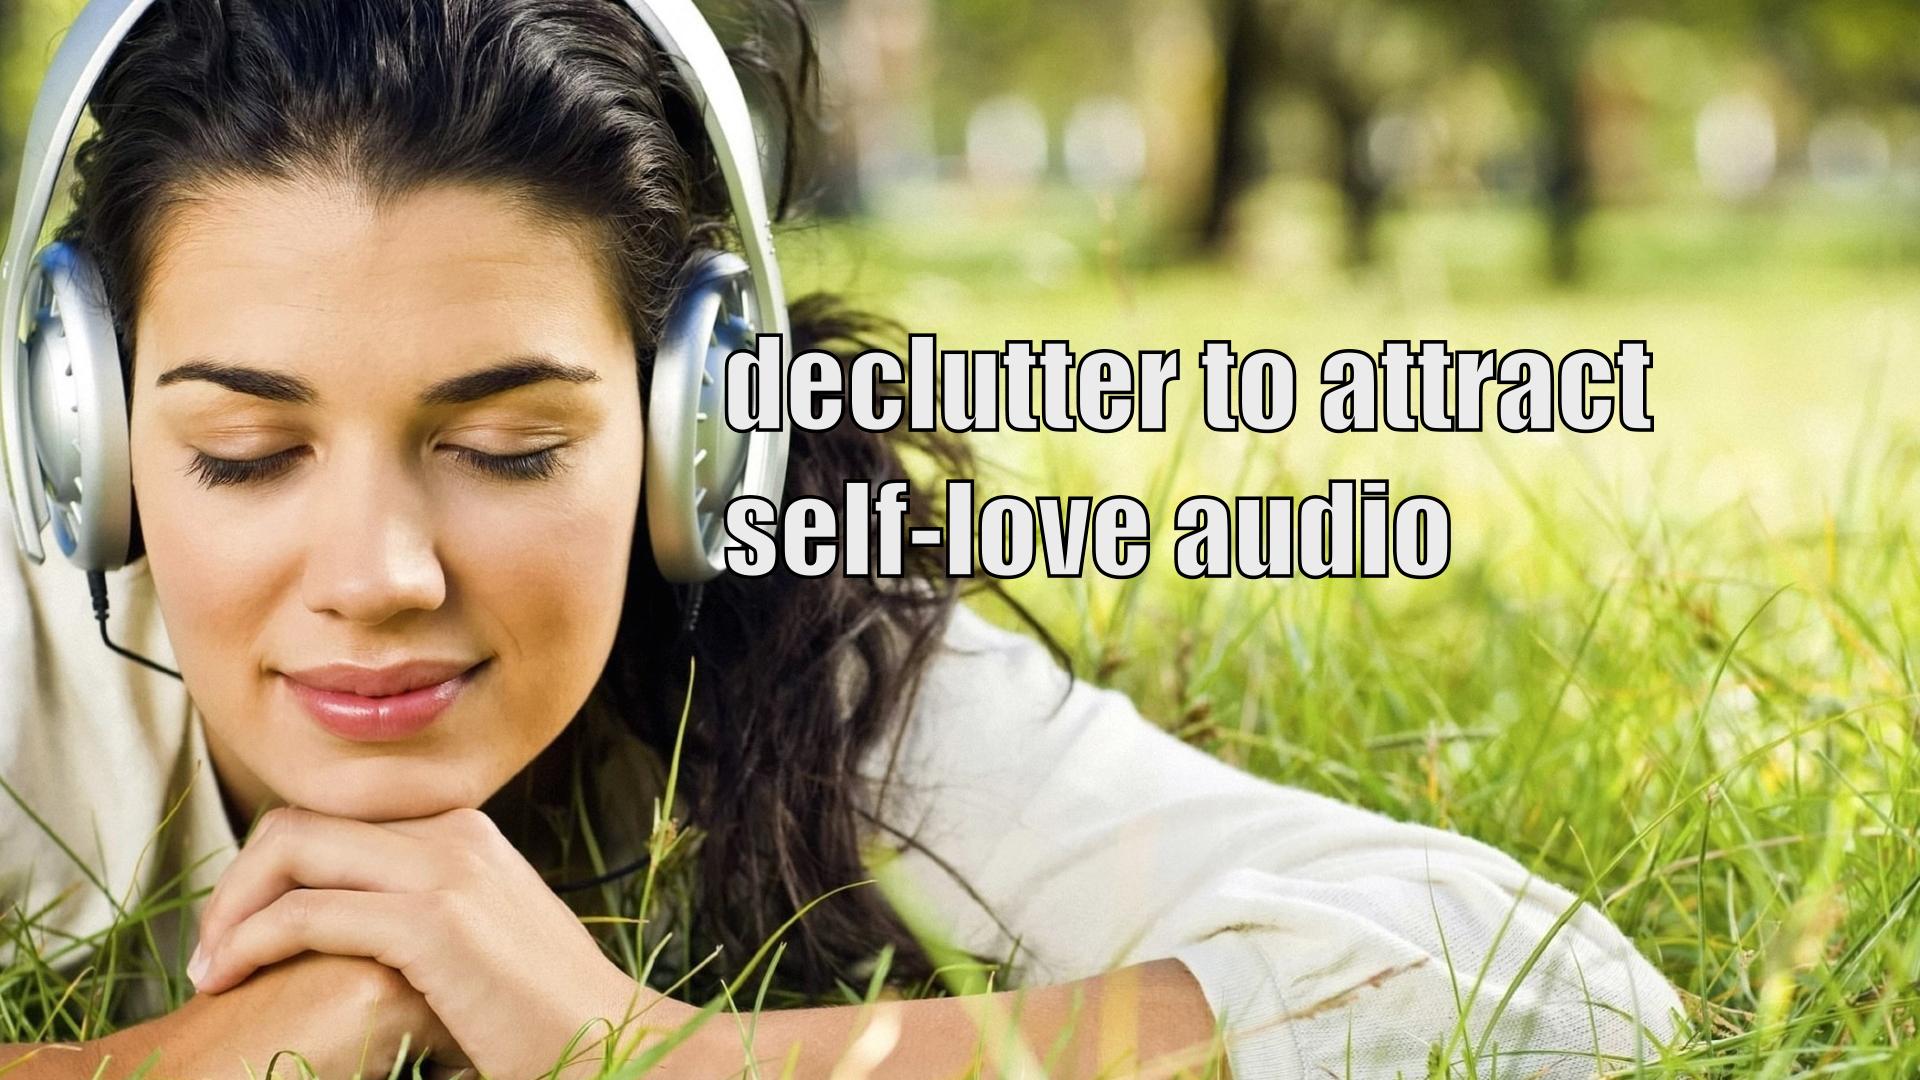 declutter to attract self-love audio